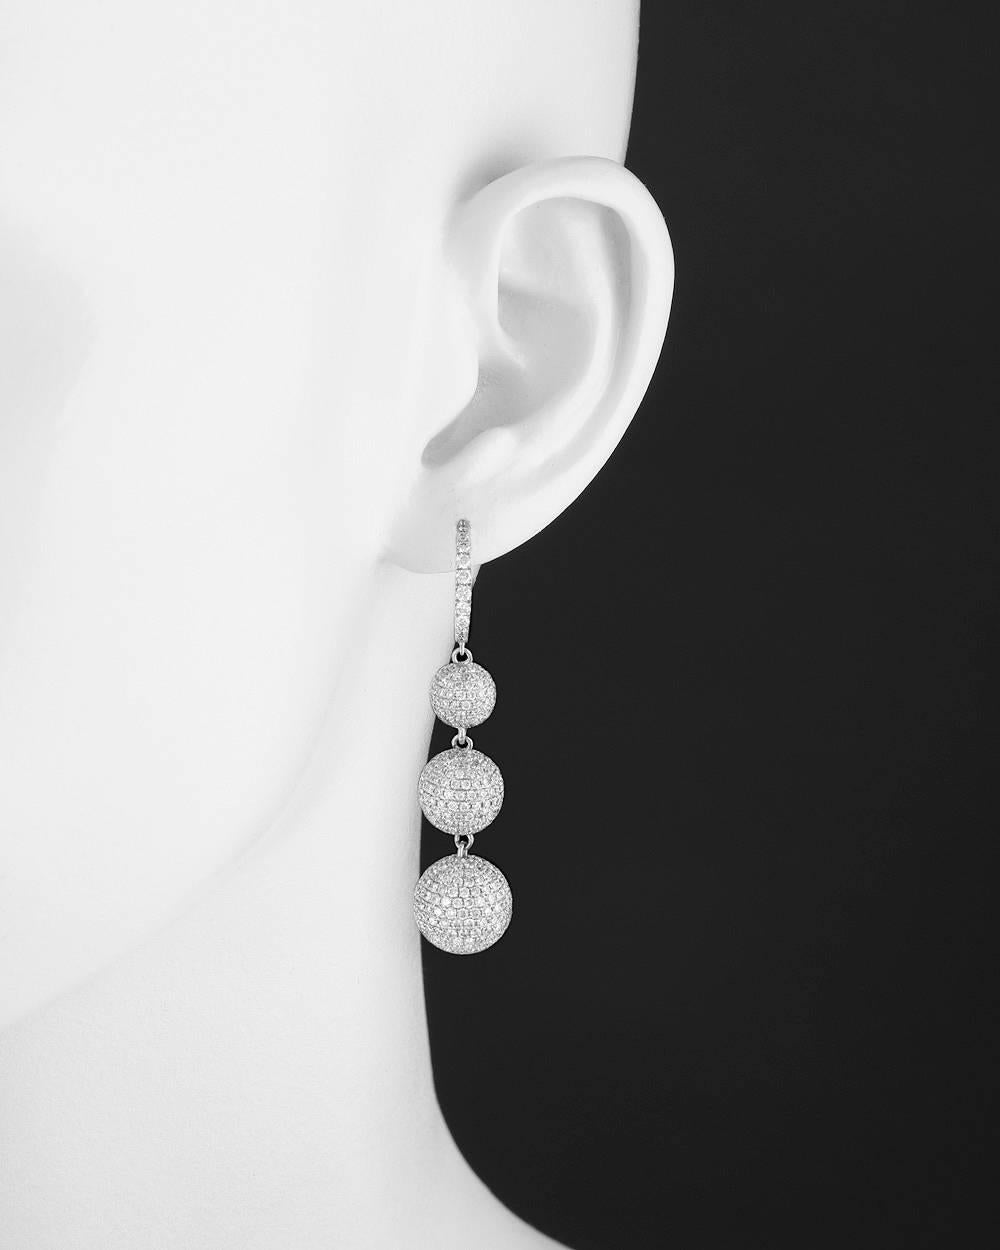 Pavé diamond ball 3-drop earrings, set with round diamonds weighing approximately 9.21 total carats, in 18k white gold, signed Odelia, circa 2007. Snap hoop tops, for pierced ears. 2.15